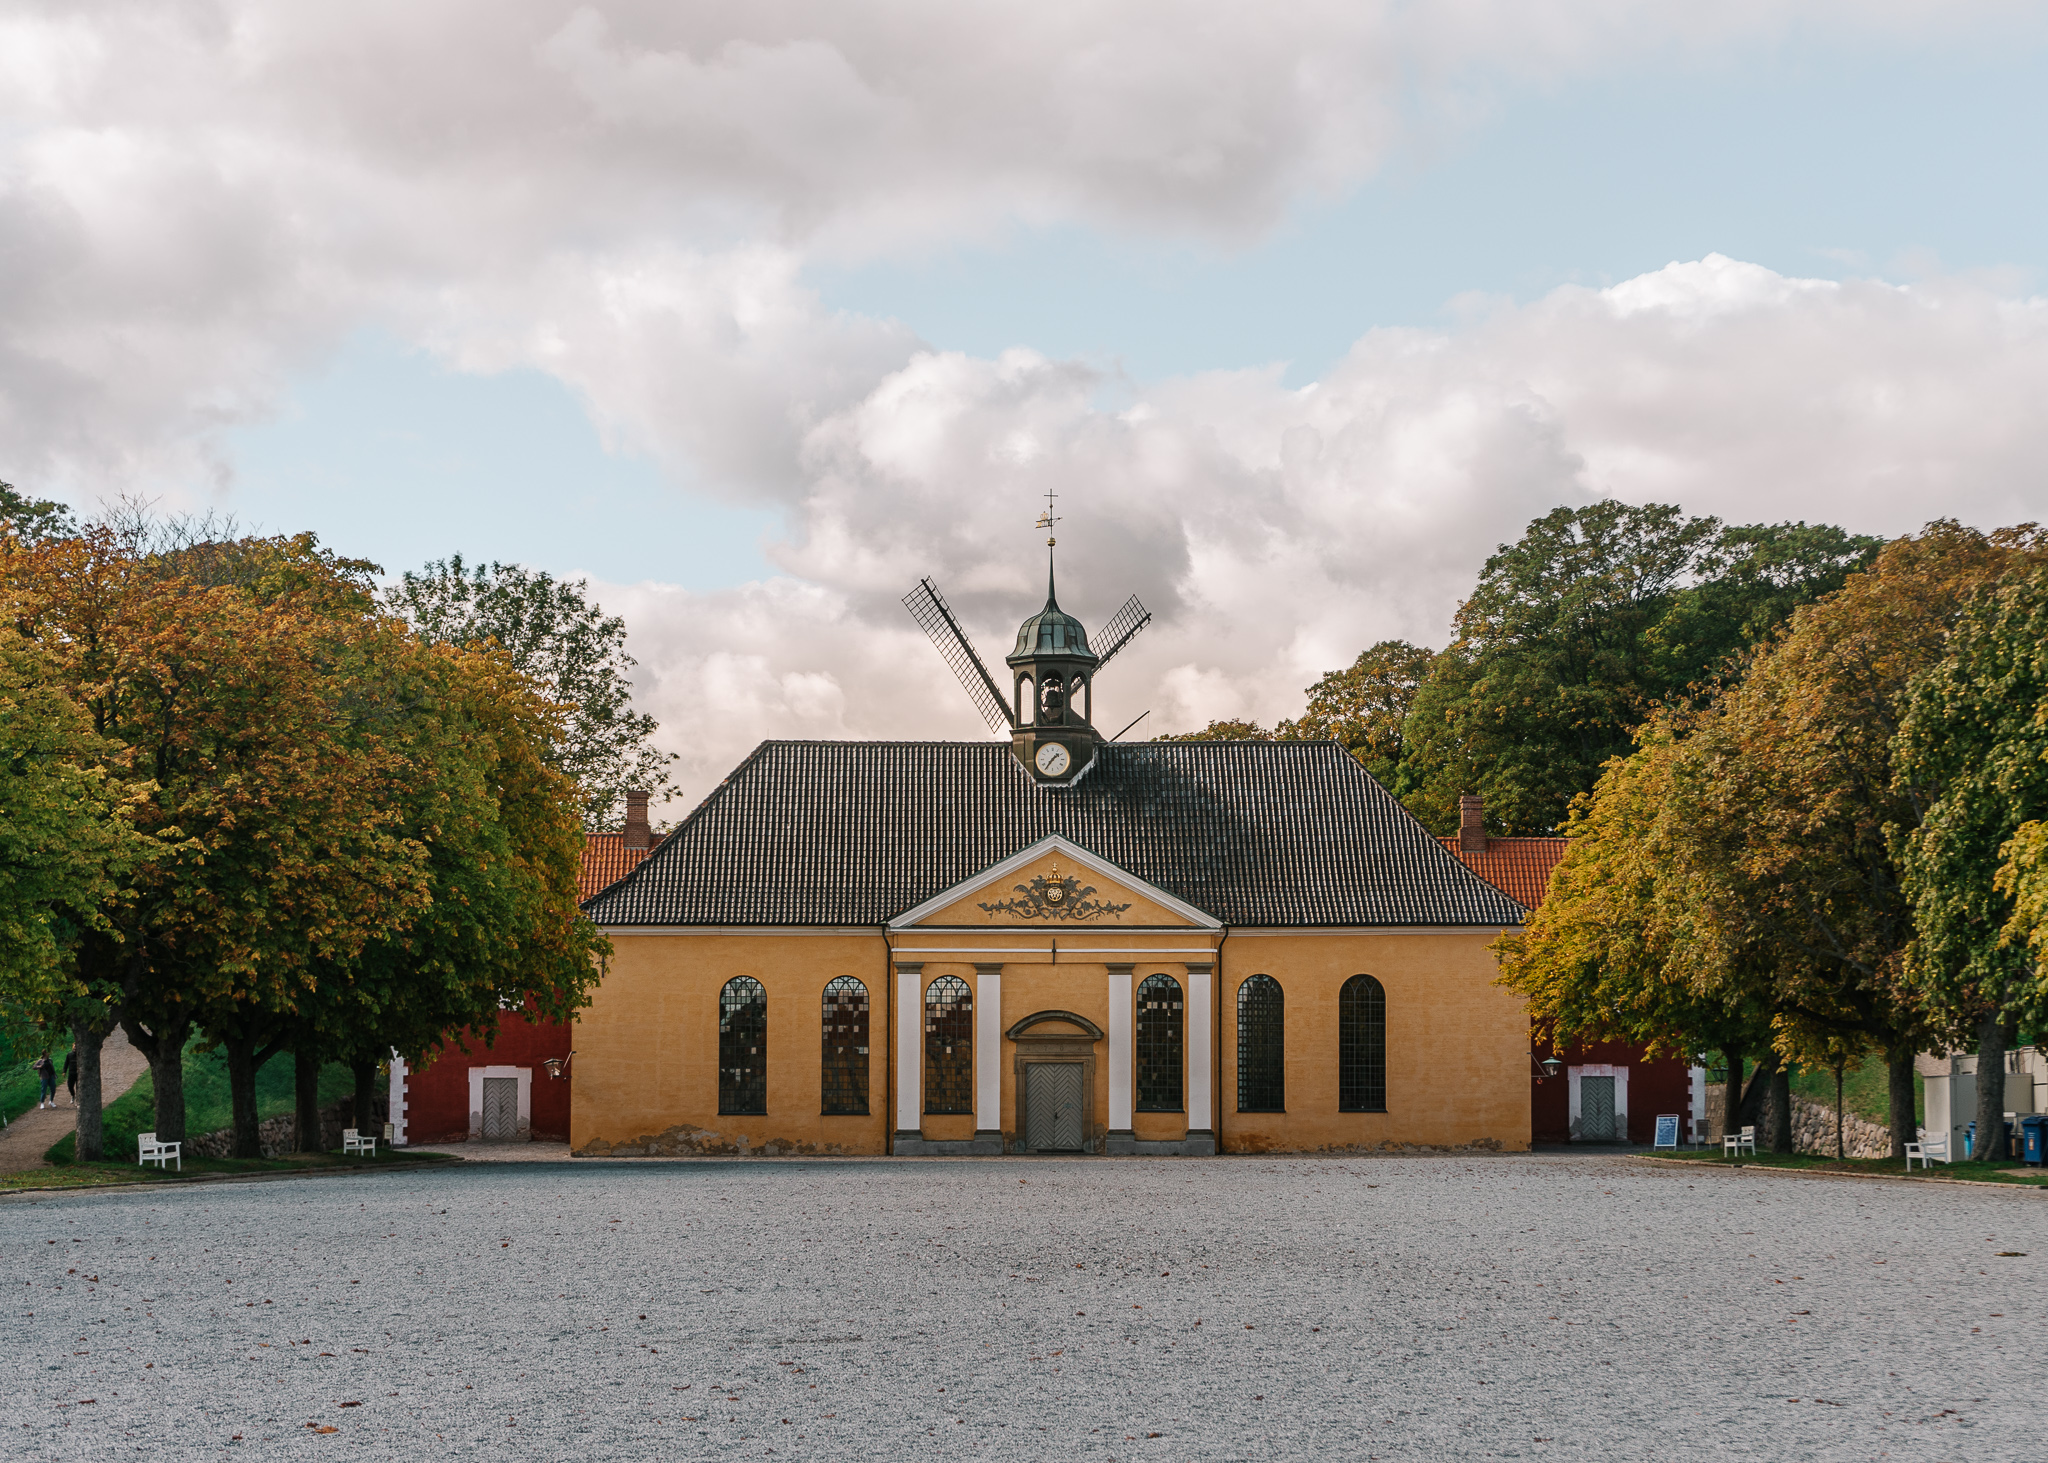 A yellow building with trees on each side in a deserted lot area in Kastellet, Copenhagen.